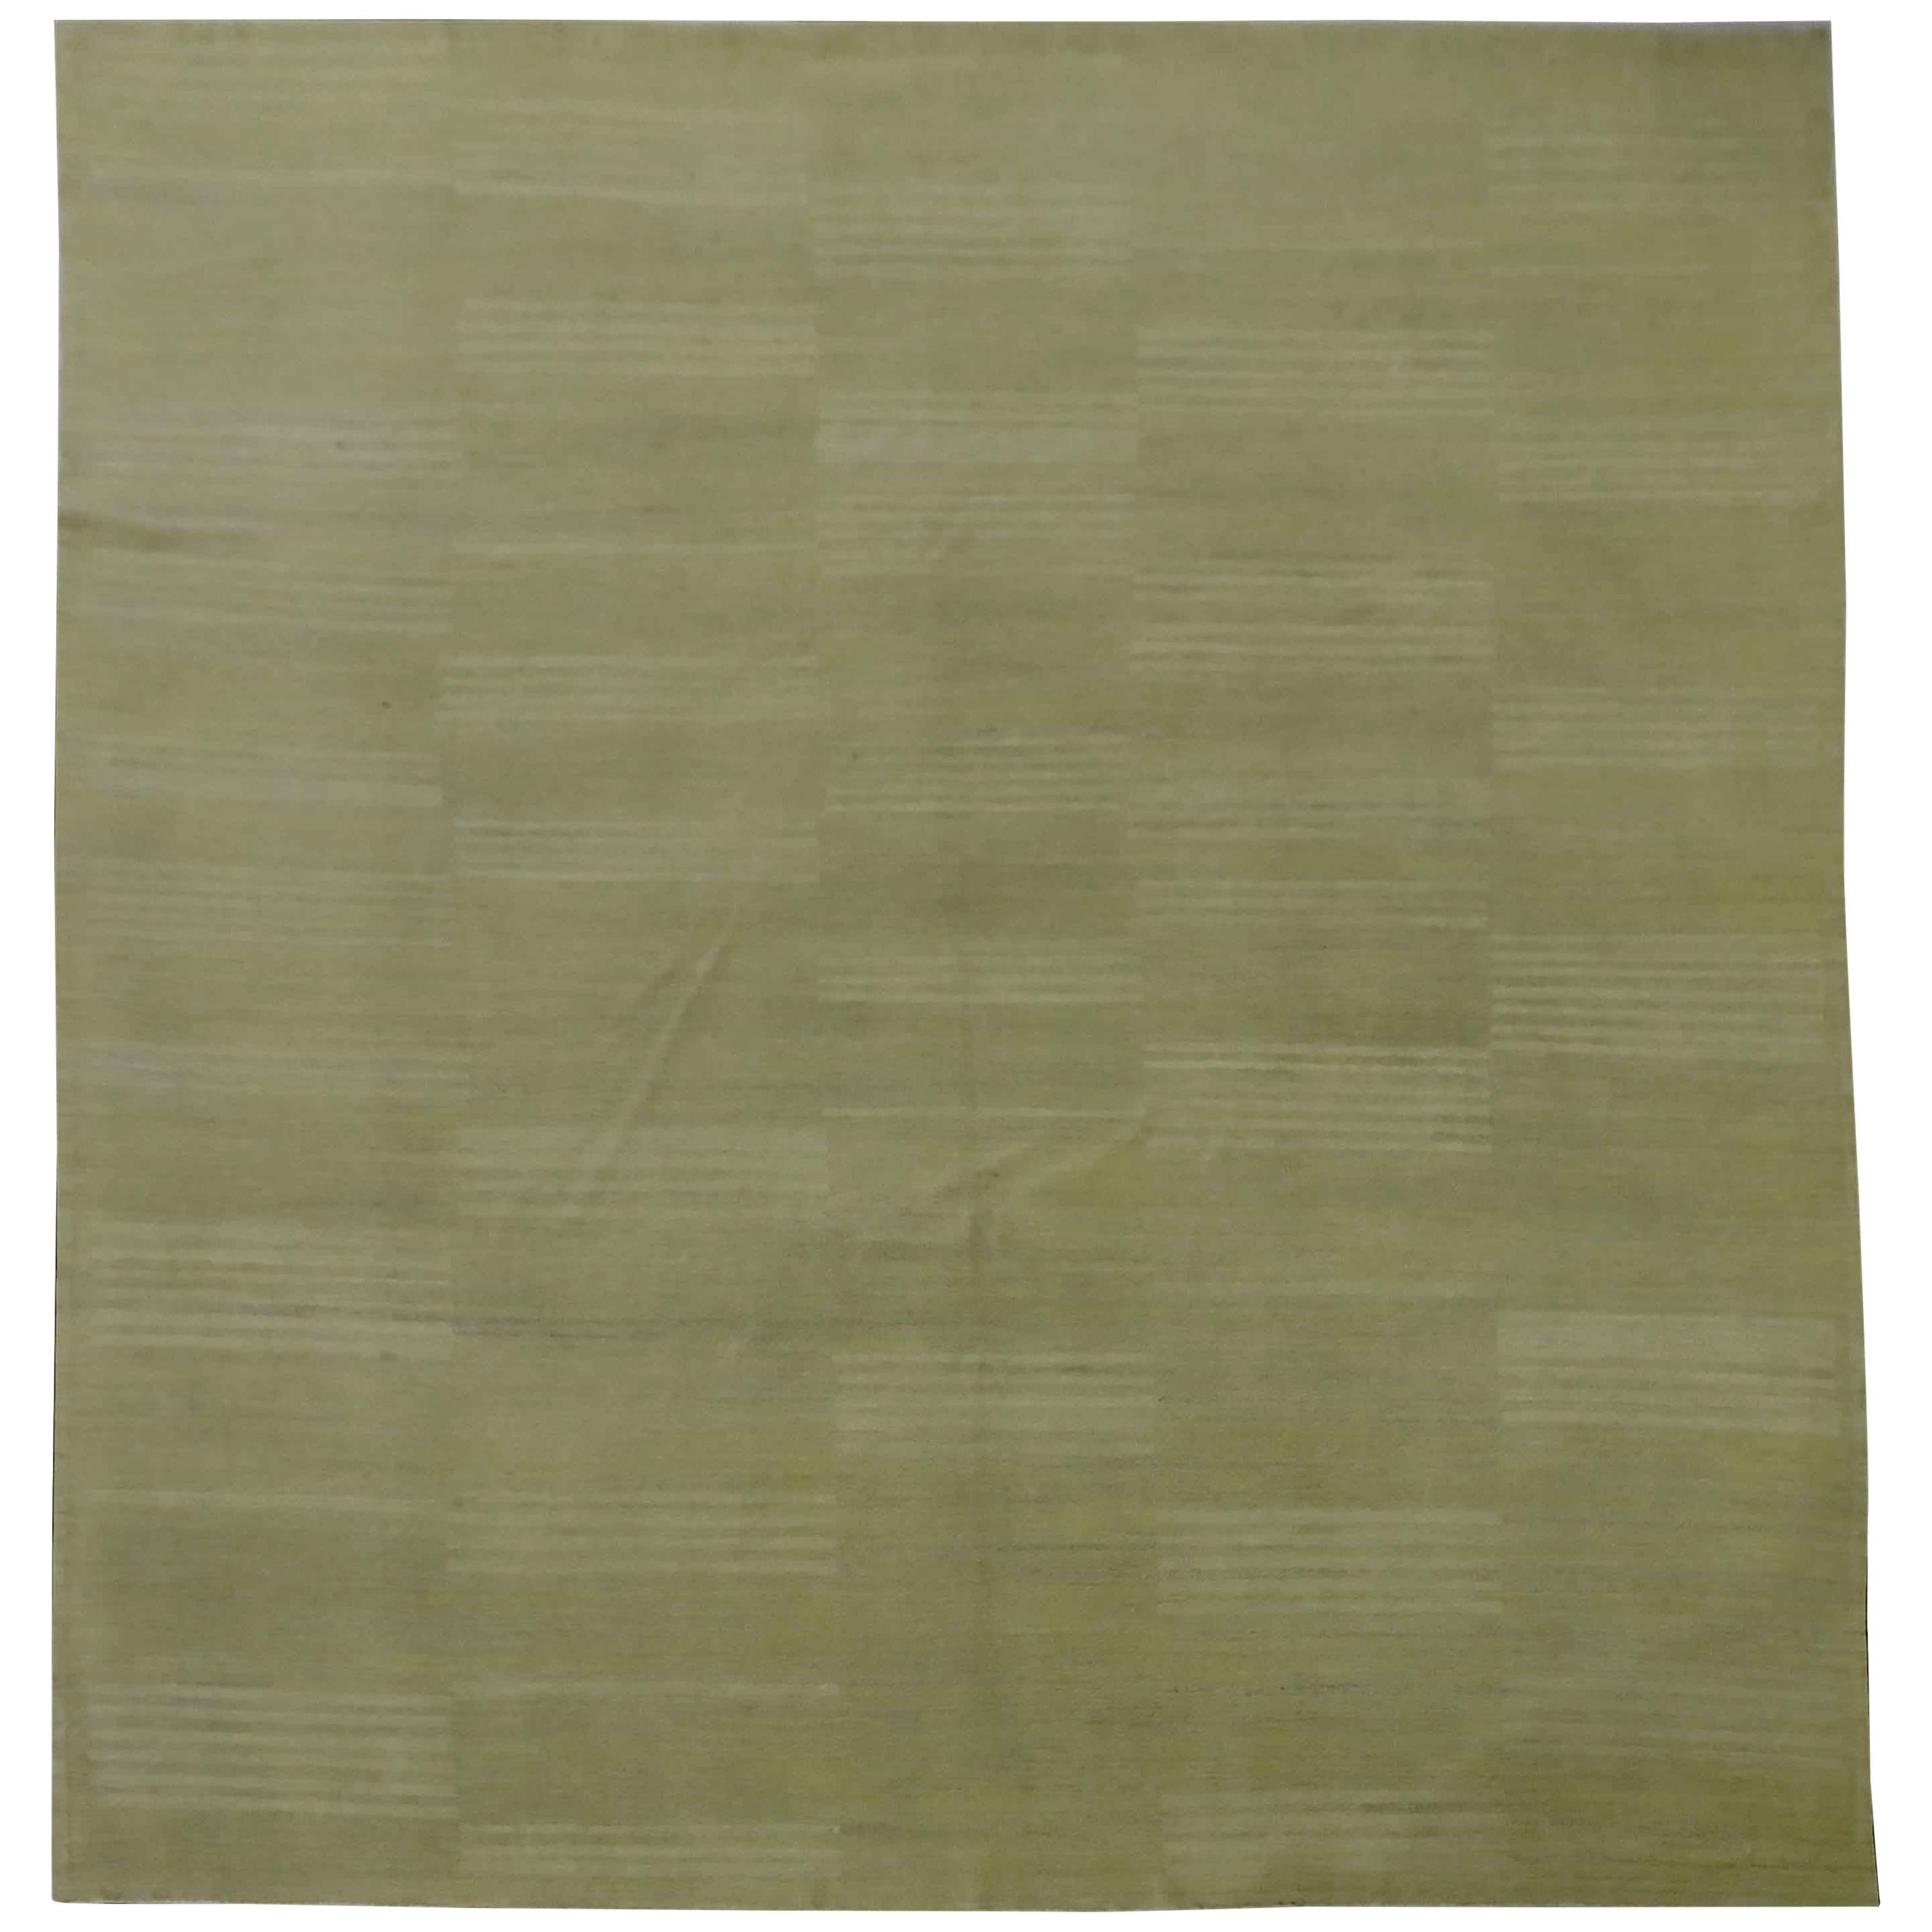 New Persian Flat-Weave Kilim Style Rug with Ivory Stripes on Green Field